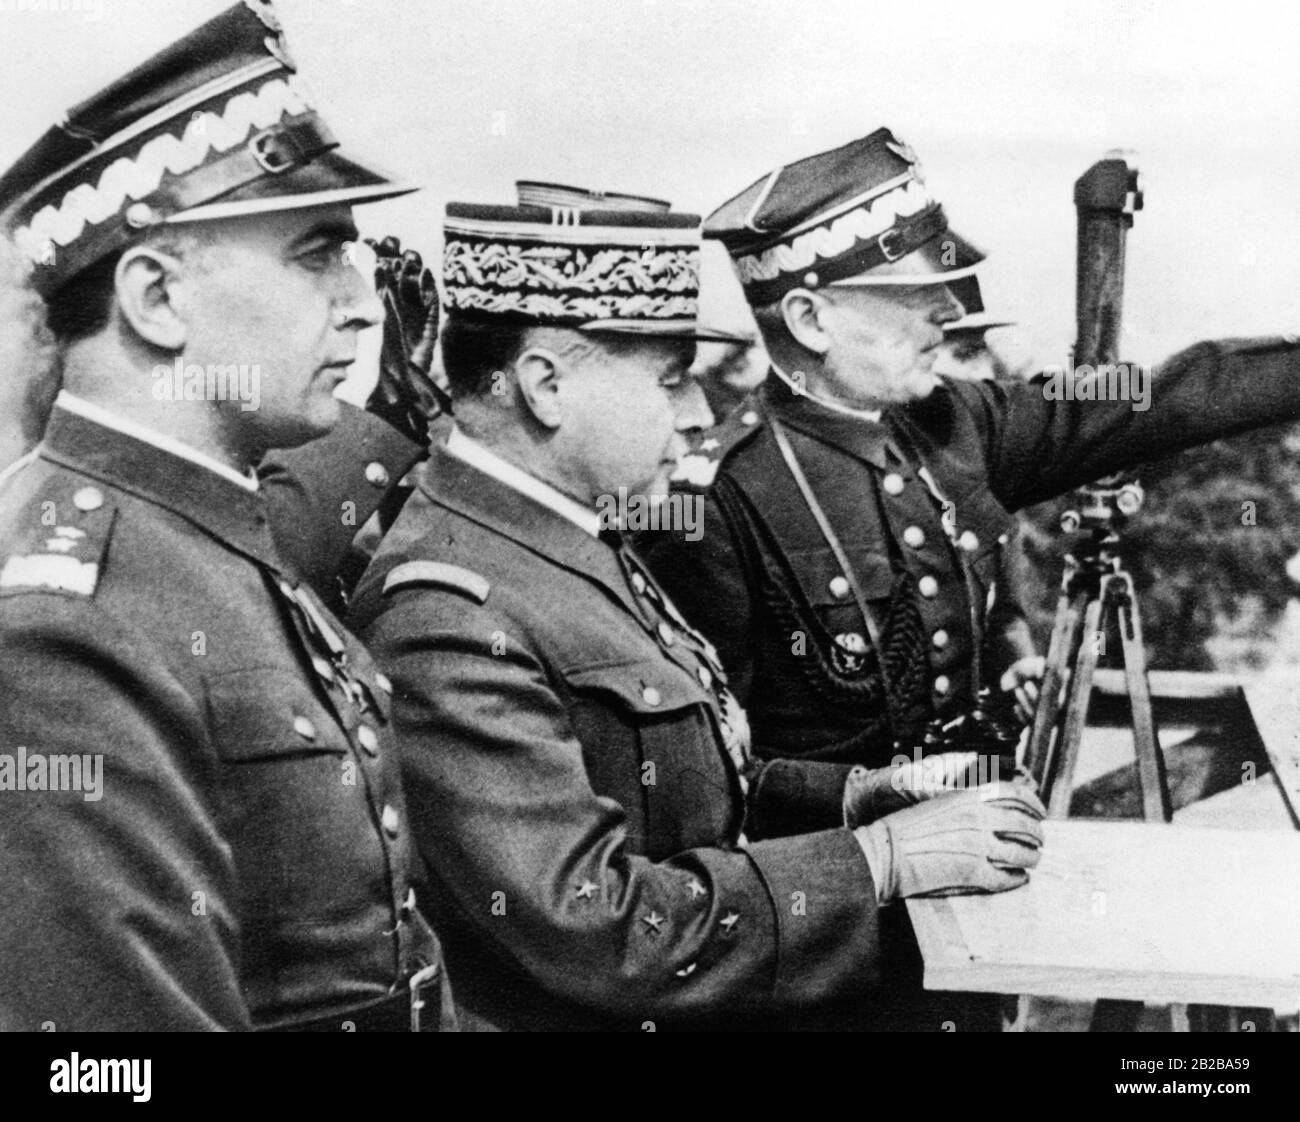 Mobilization in France during the last weeks of peace before the Second World War. From 15 to 20 May 1939 maneuvers took place in France, in which a strong Polish delegation of officers participated. Our photo shows the French commander-in-chief General Gamelin (centre) with the Polish General Kasprzycki (left). Stock Photo